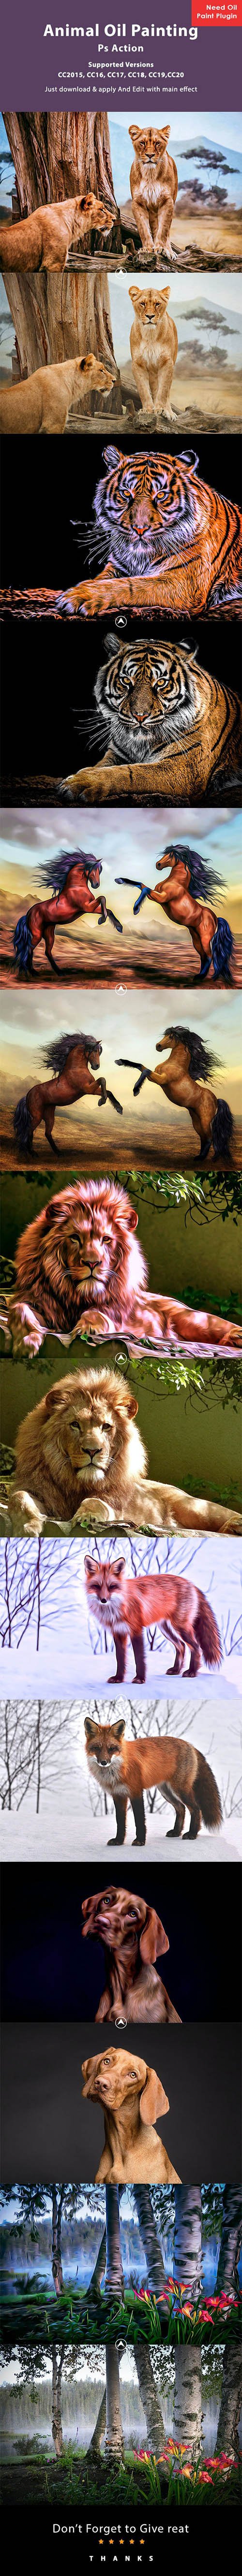 GraphicRiver - Animal Oil Painting Photoshop Action - 26608753